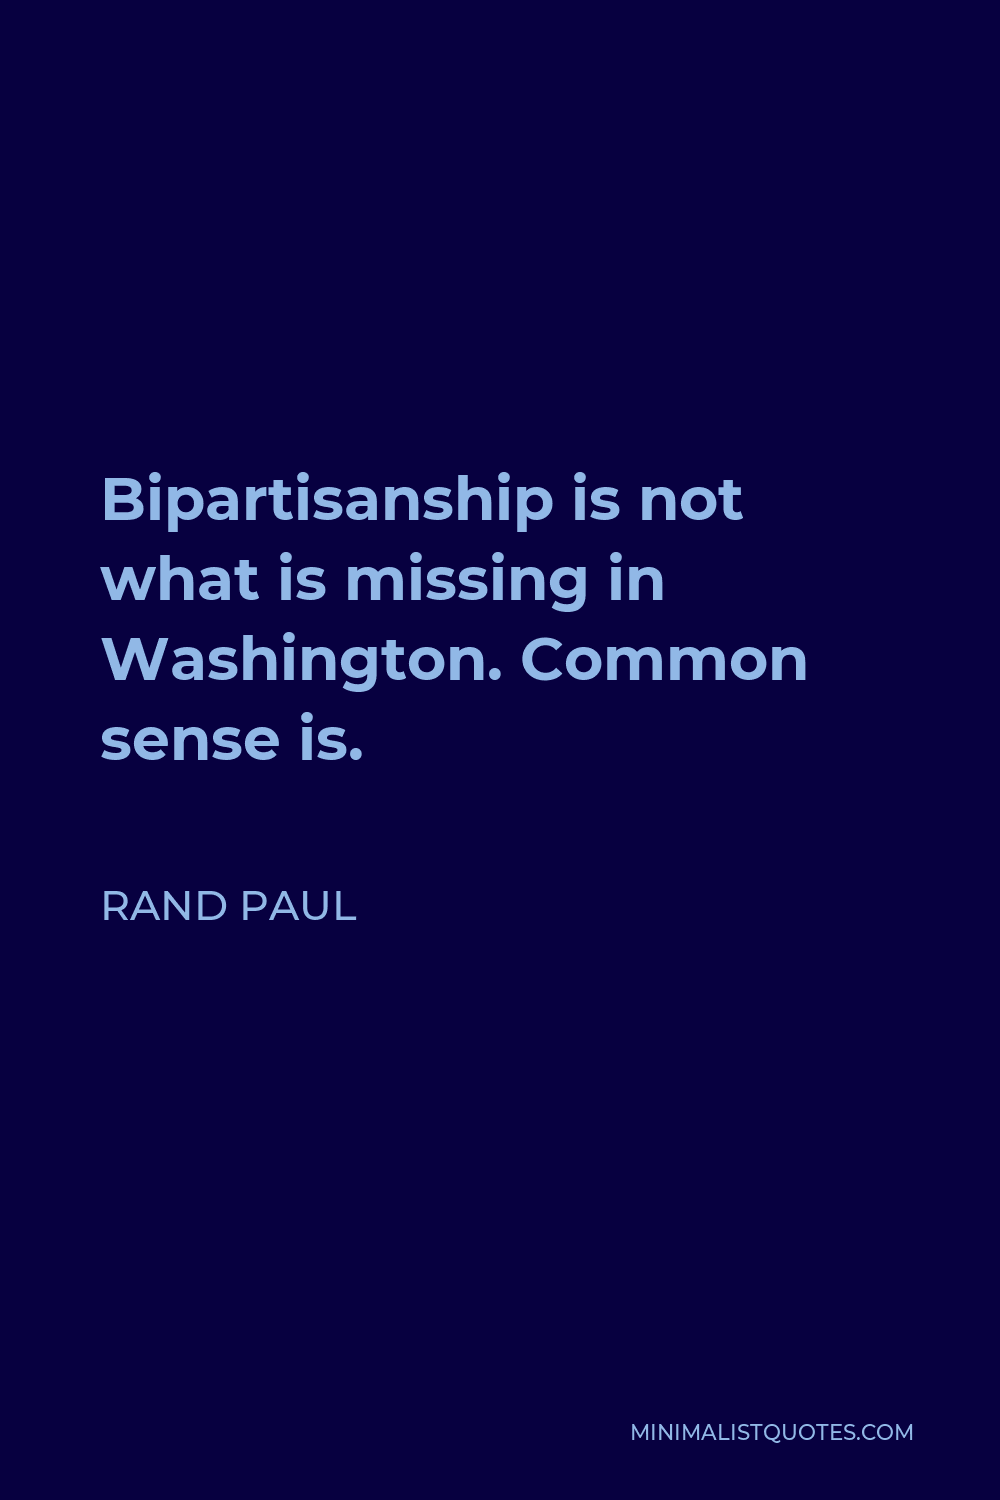 Rand Paul Quote - Bipartisanship is not what is missing in Washington. Common sense is.